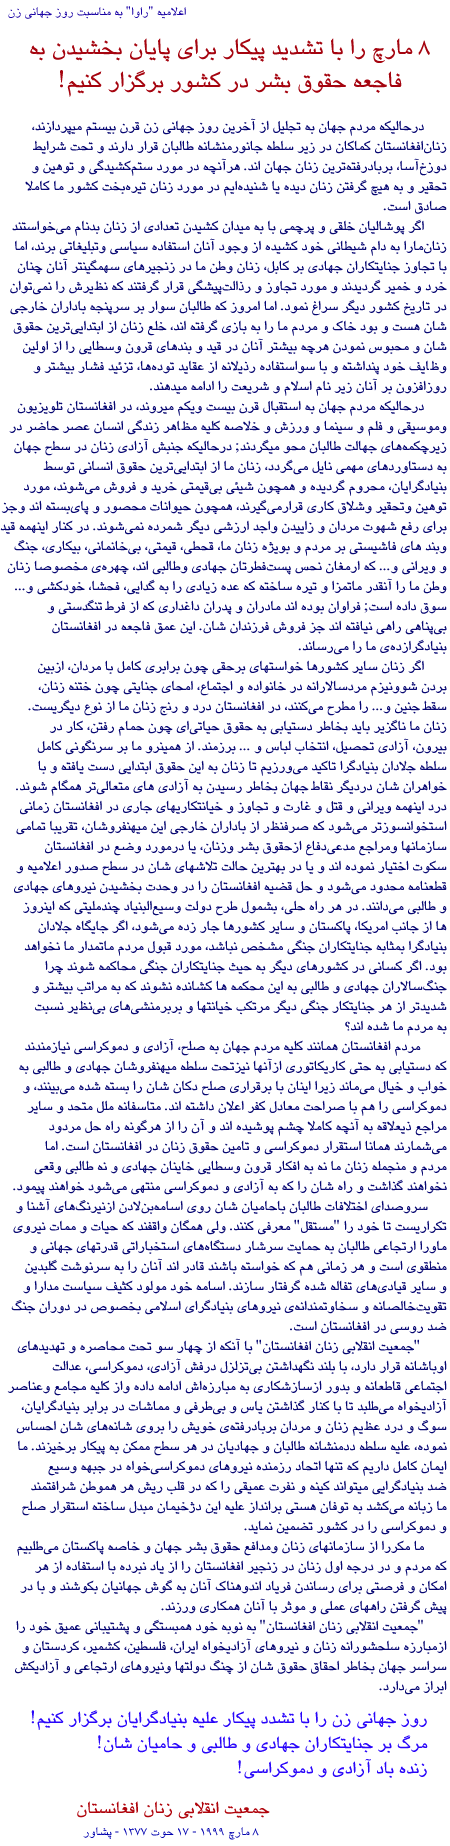 RAWA statement on March 8, 1999 (in Persian)